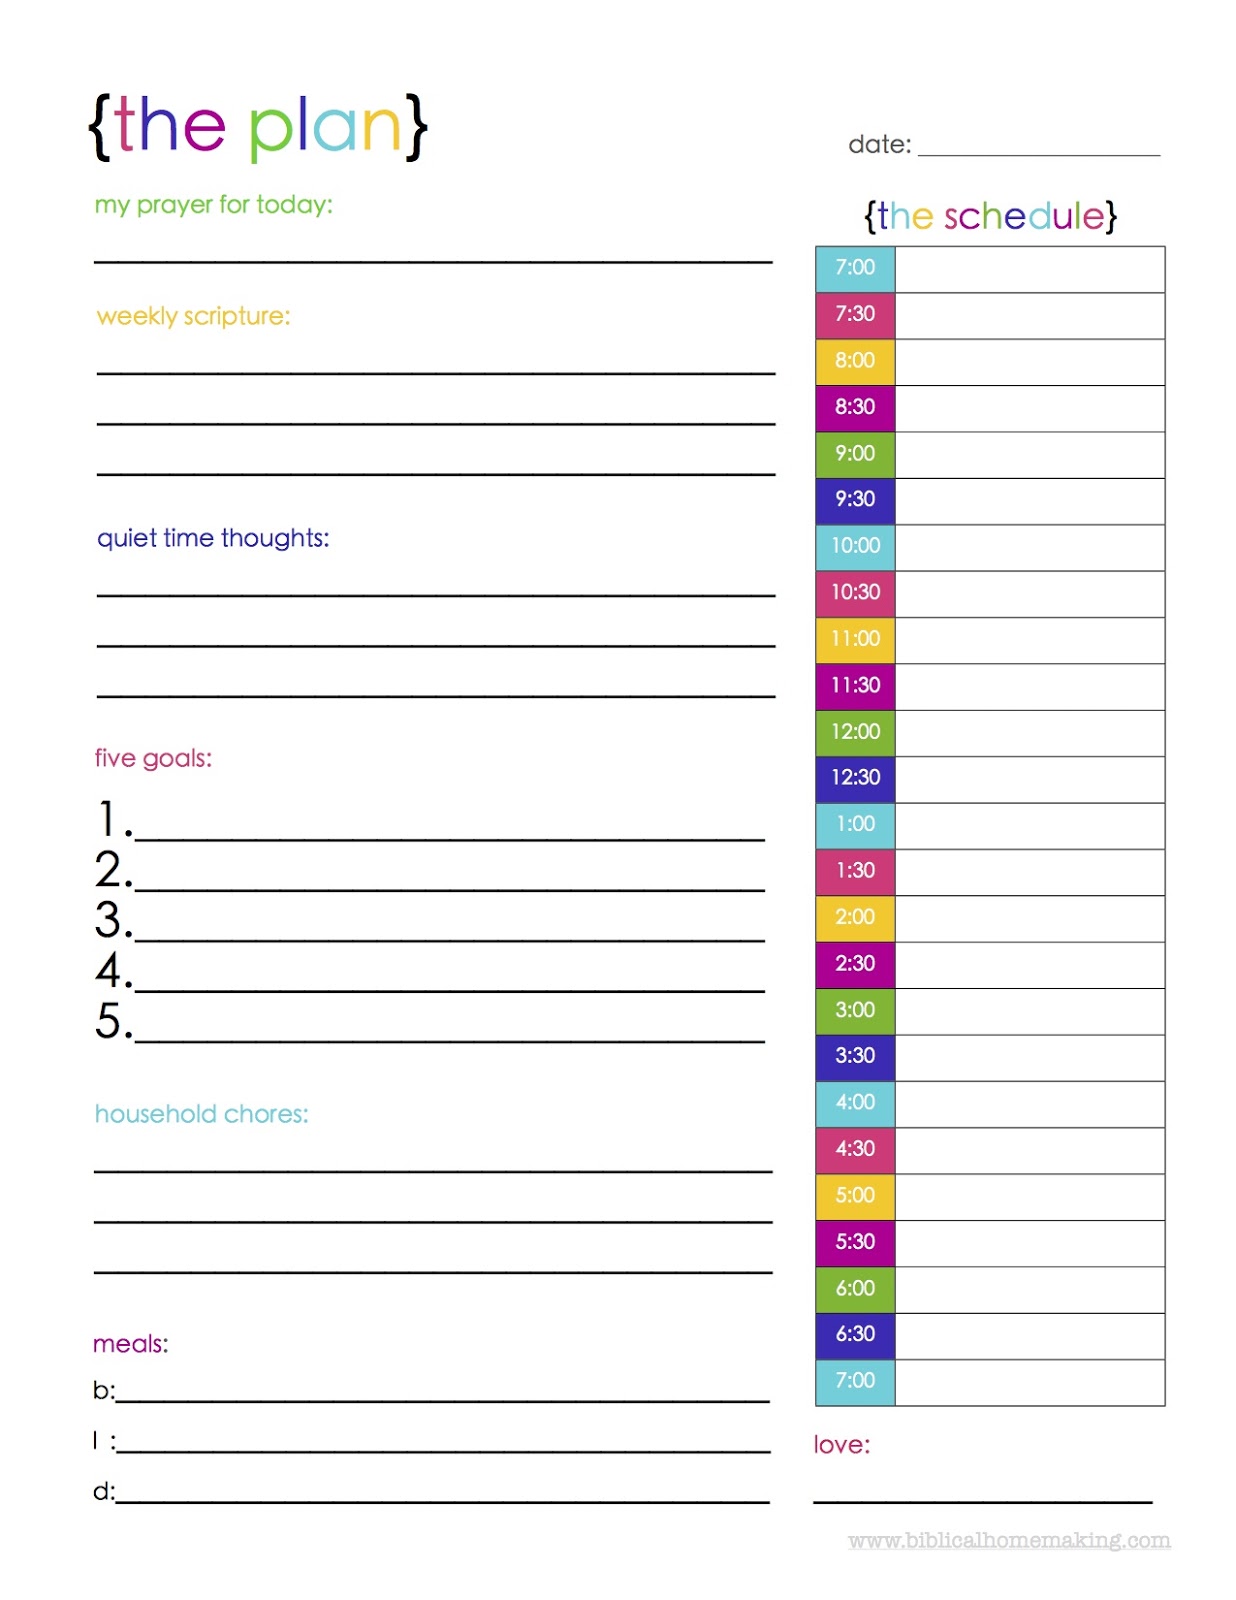 the-plan-a-colorful-free-daily-planner-printable-biblical-homemaking